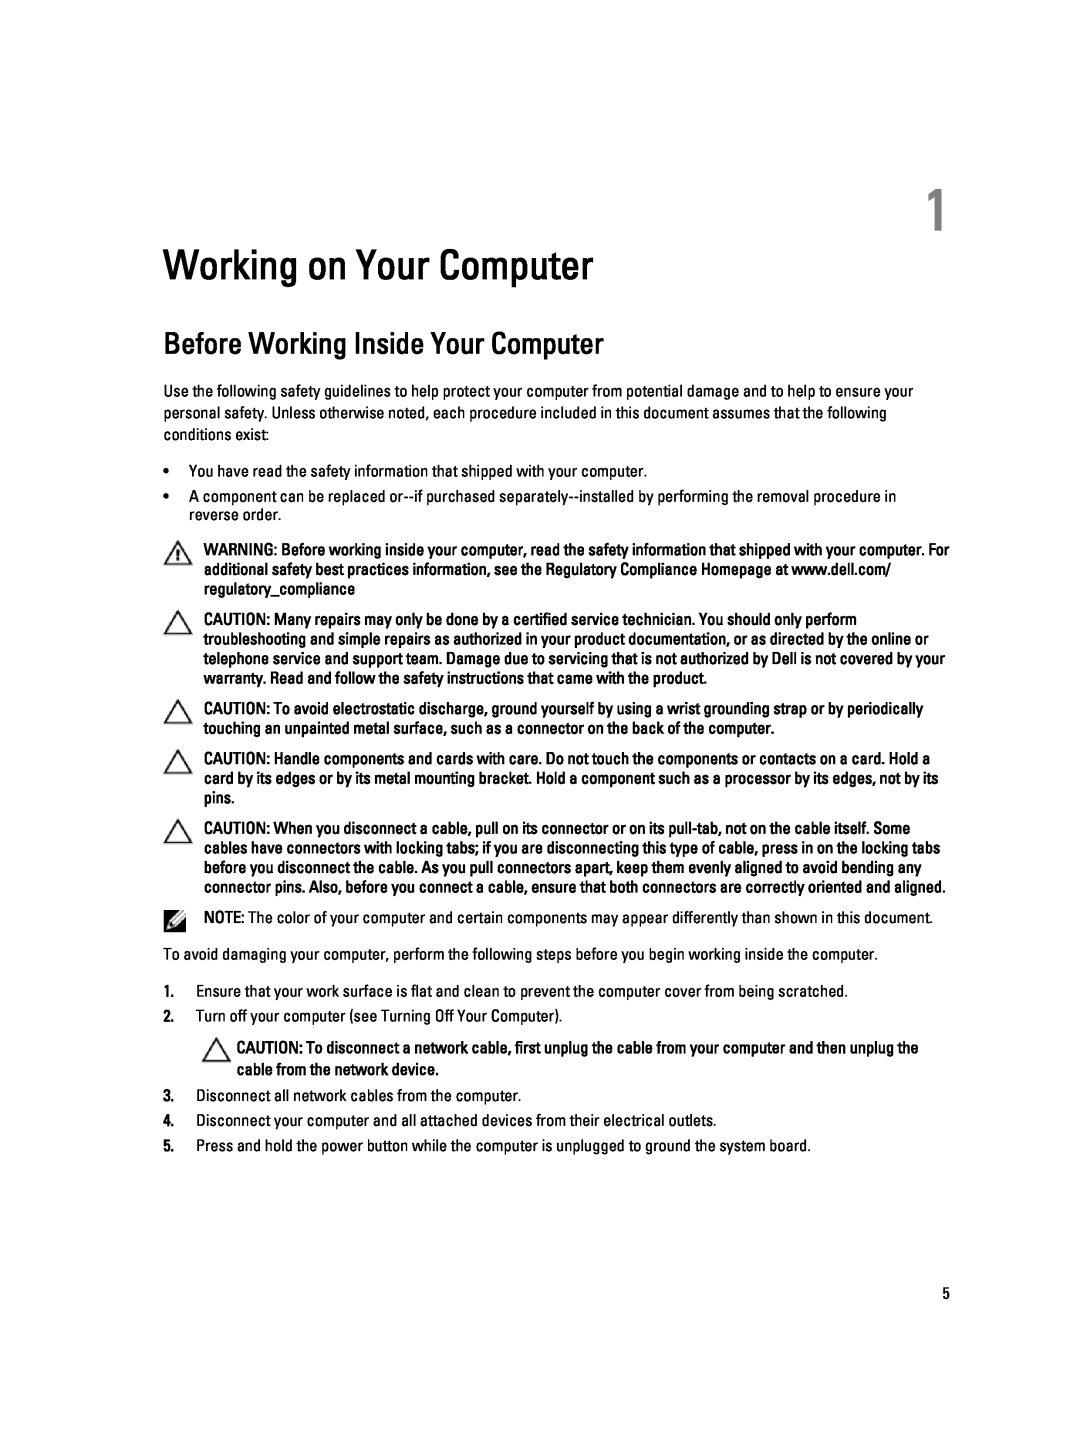 Dell T5610 owner manual Working on Your Computer, Before Working Inside Your Computer 